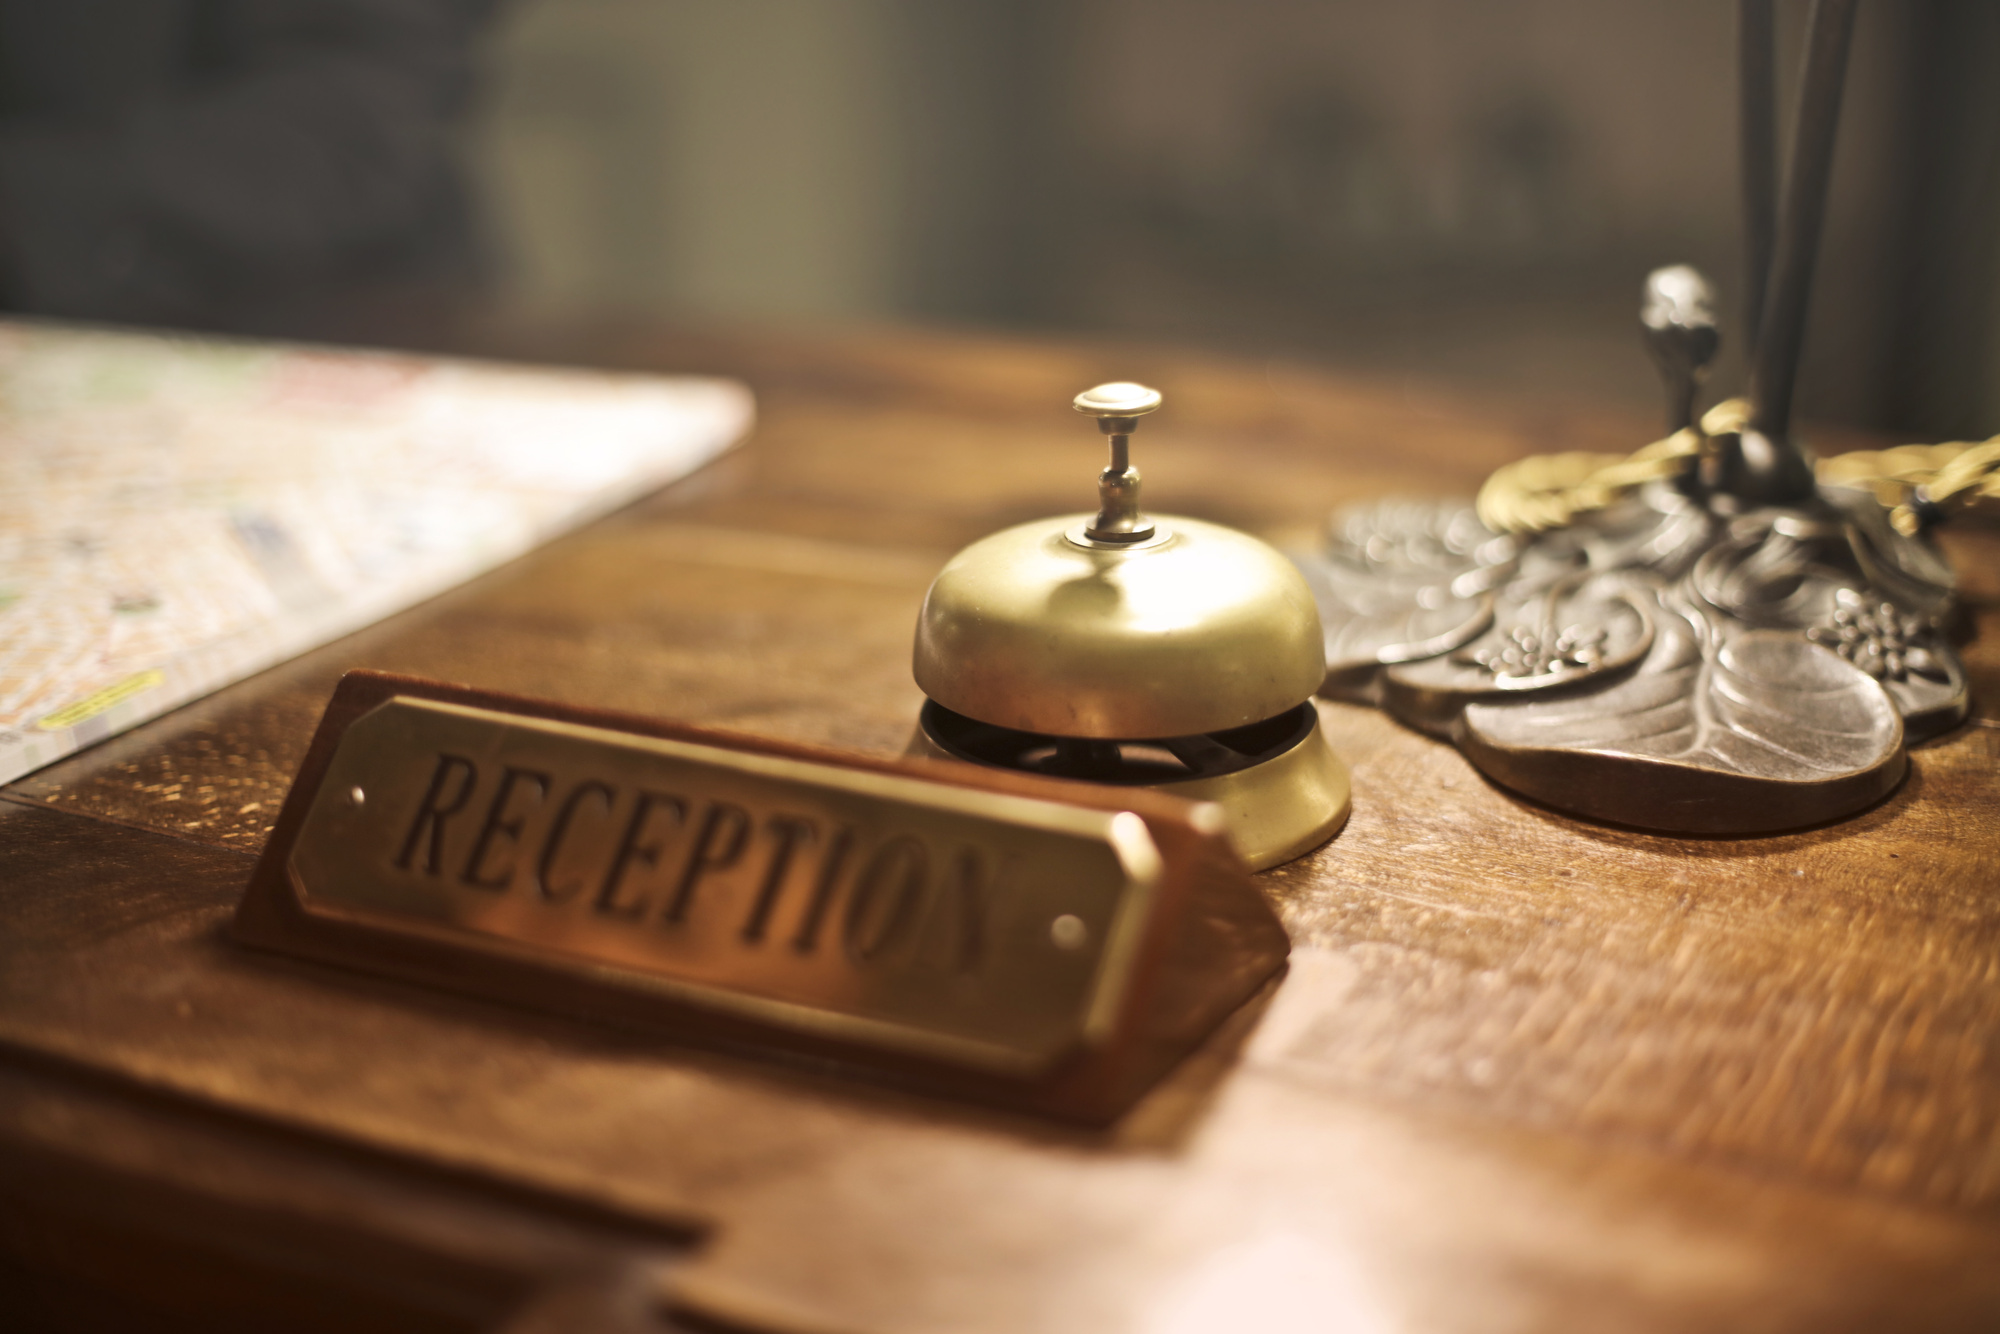 Reception desk with antique hotel bell